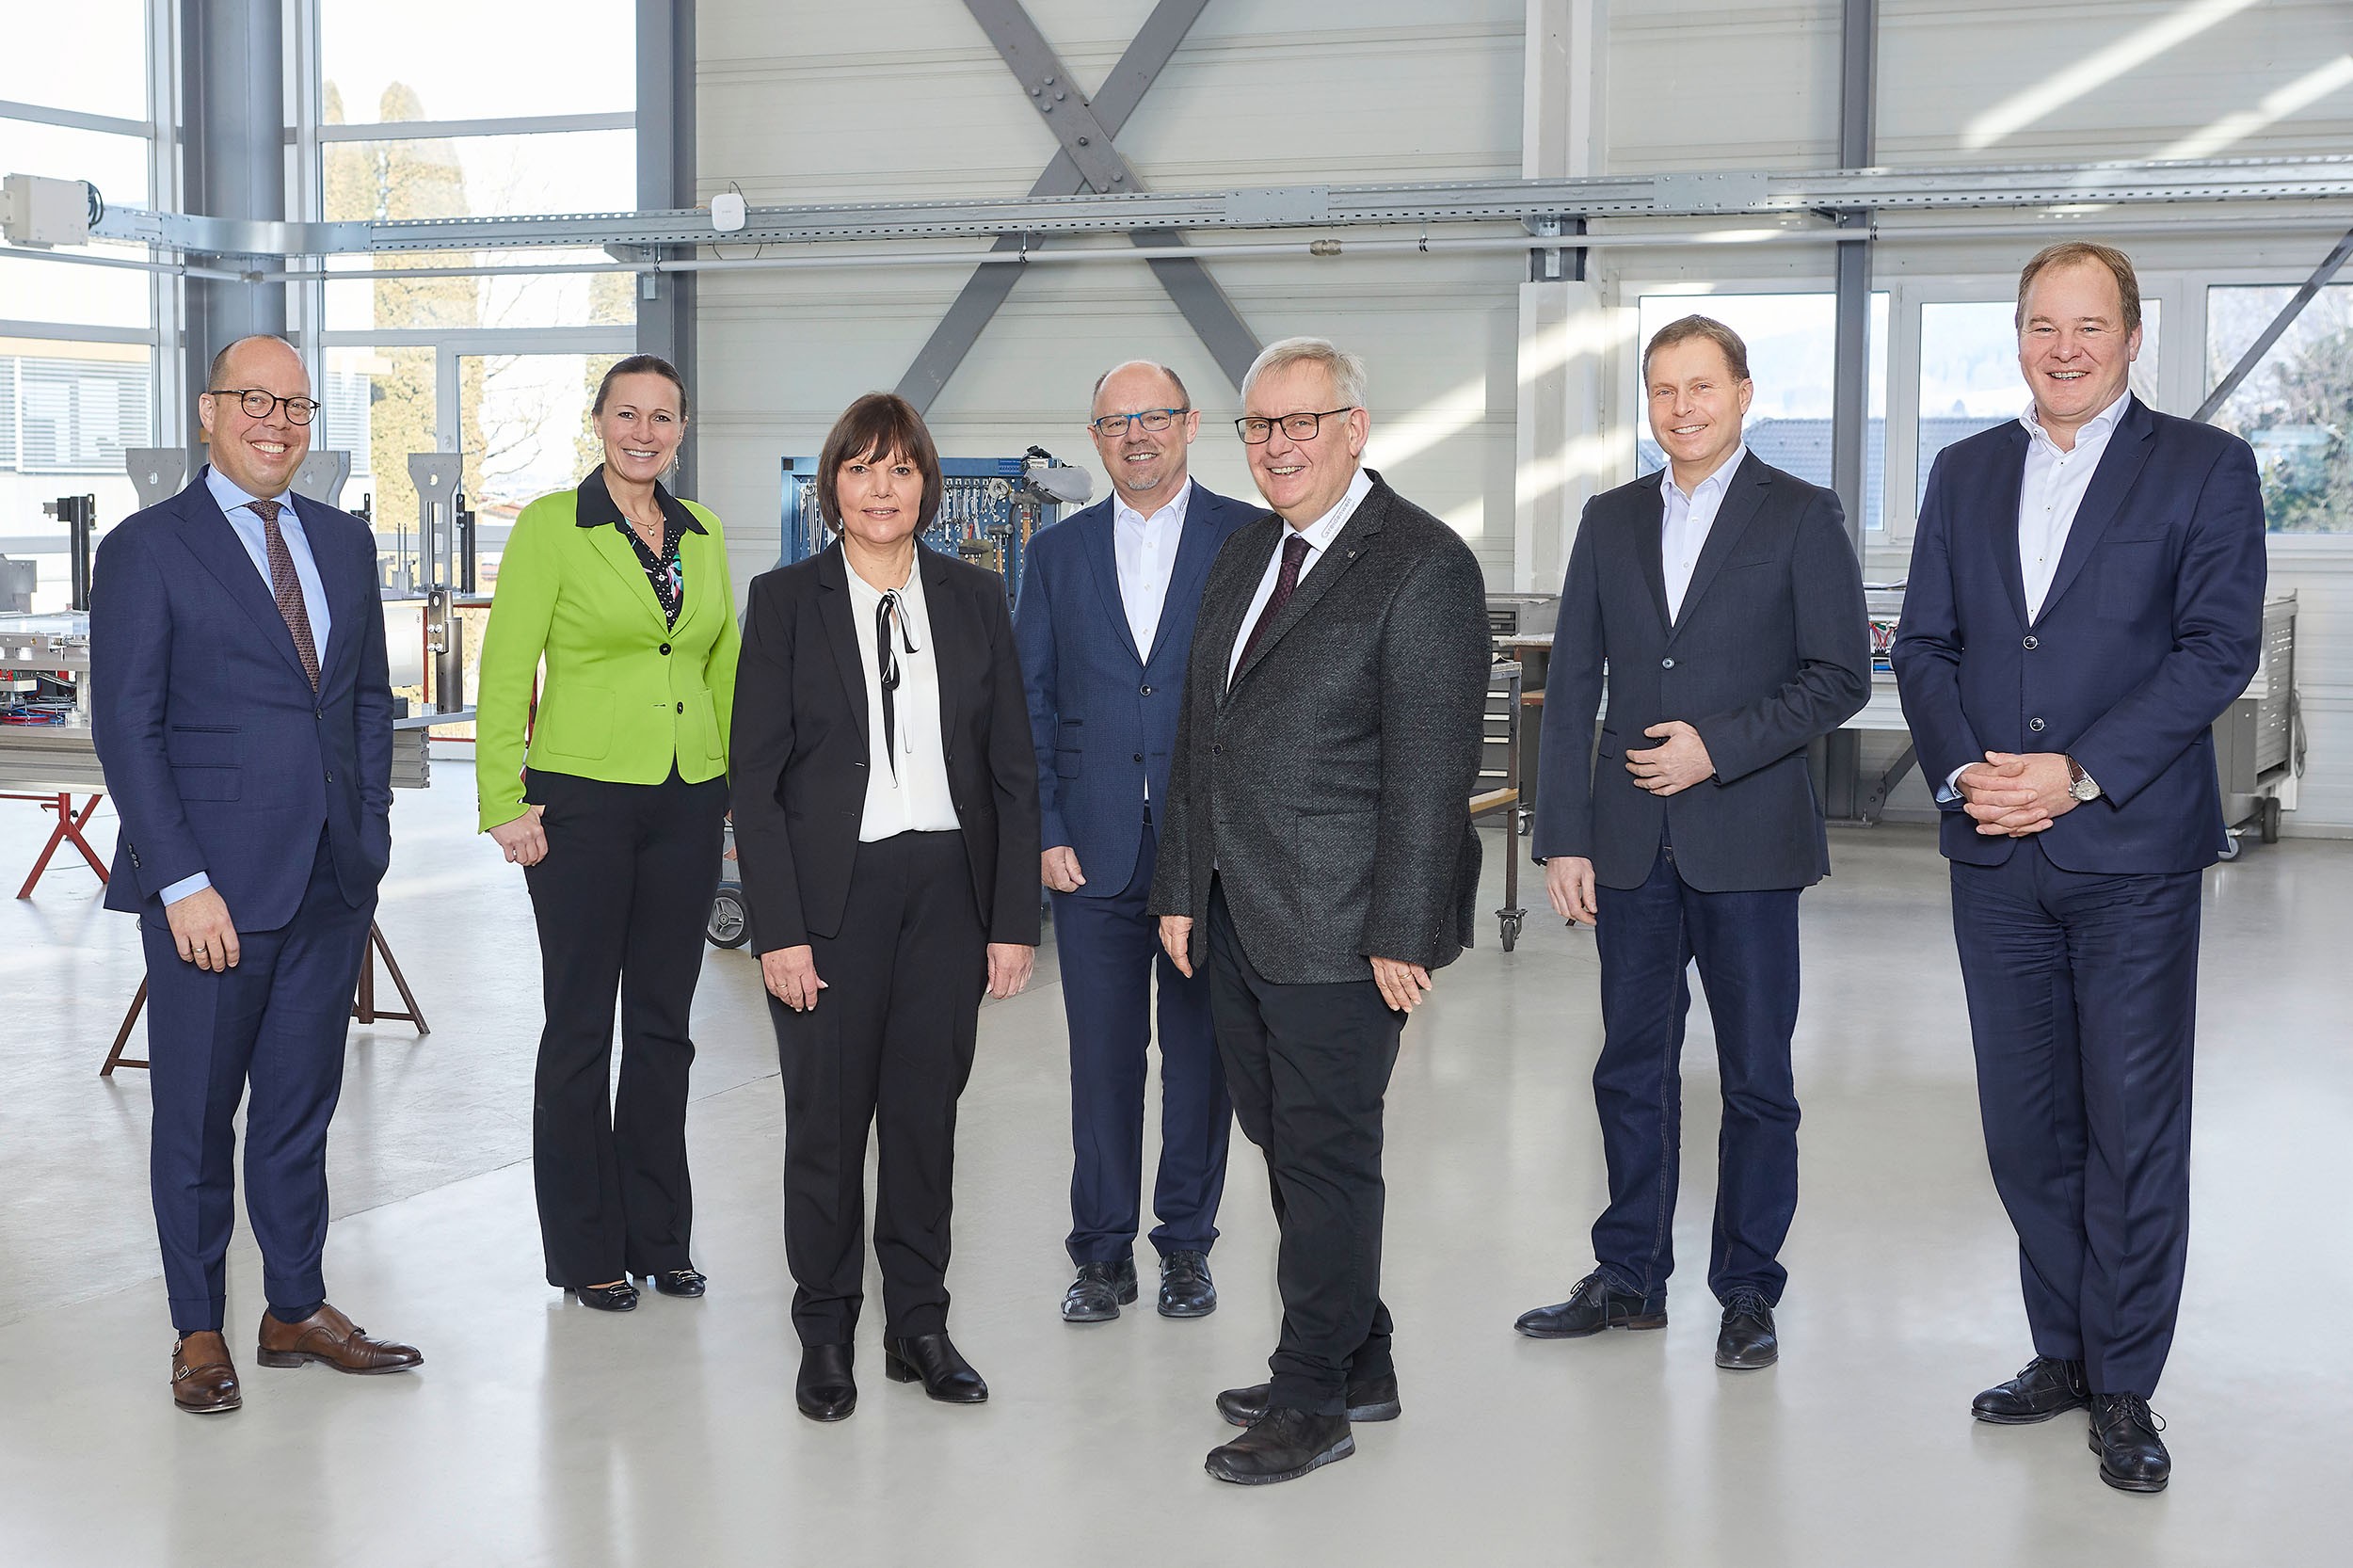 Successful takeover: The management teams of the CHIRON Group and Greidenweis are looking forward to the cooperation.